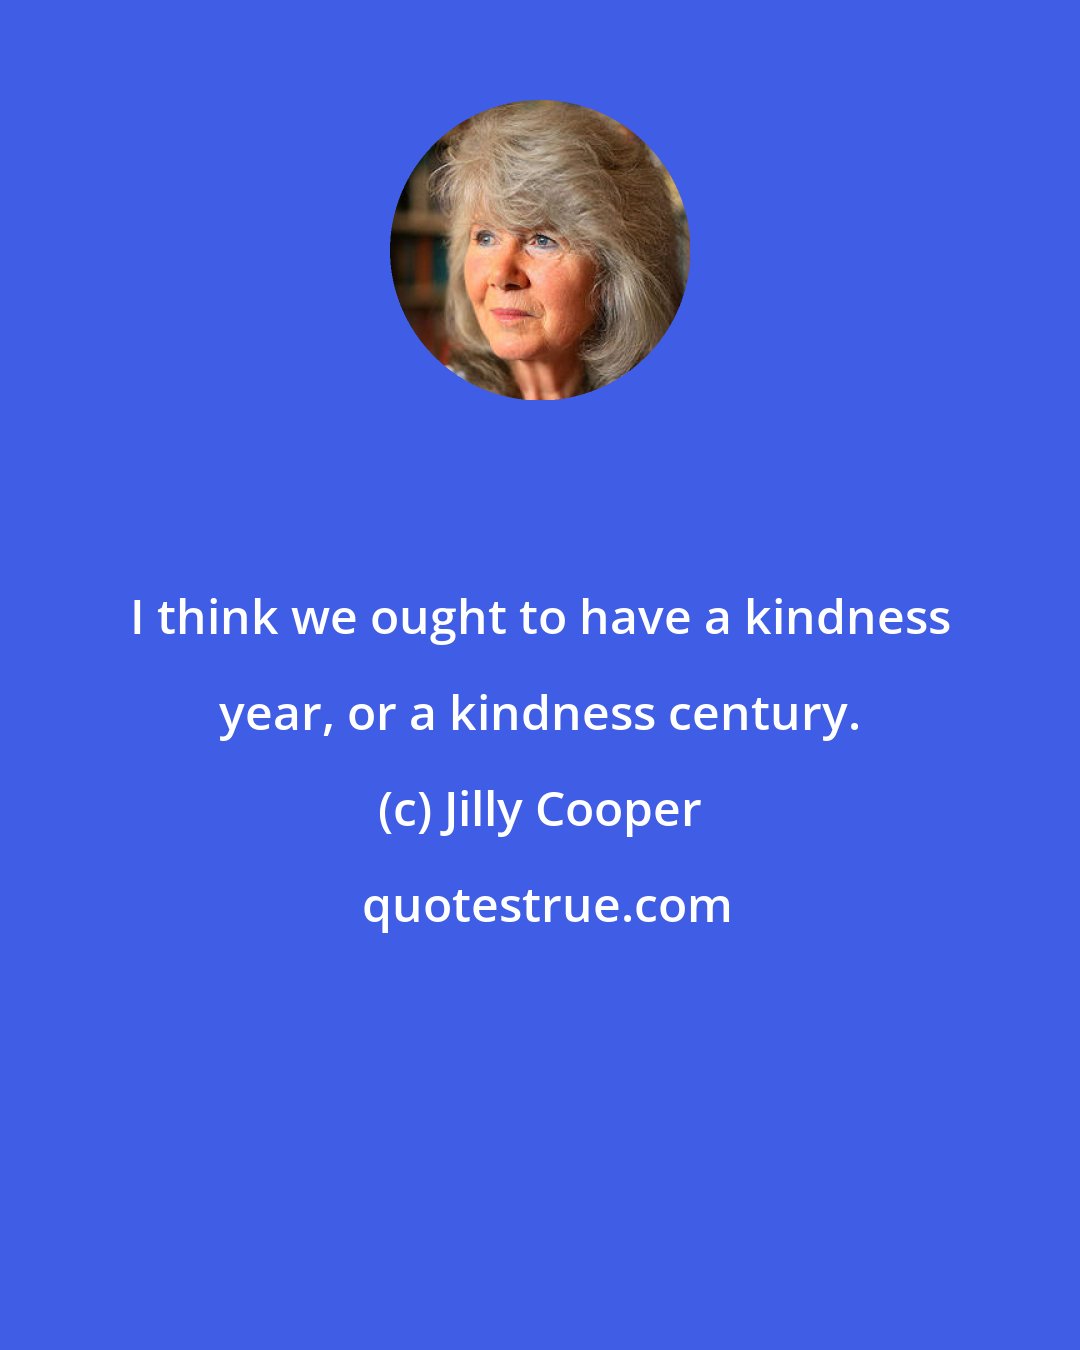 Jilly Cooper: I think we ought to have a kindness year, or a kindness century.